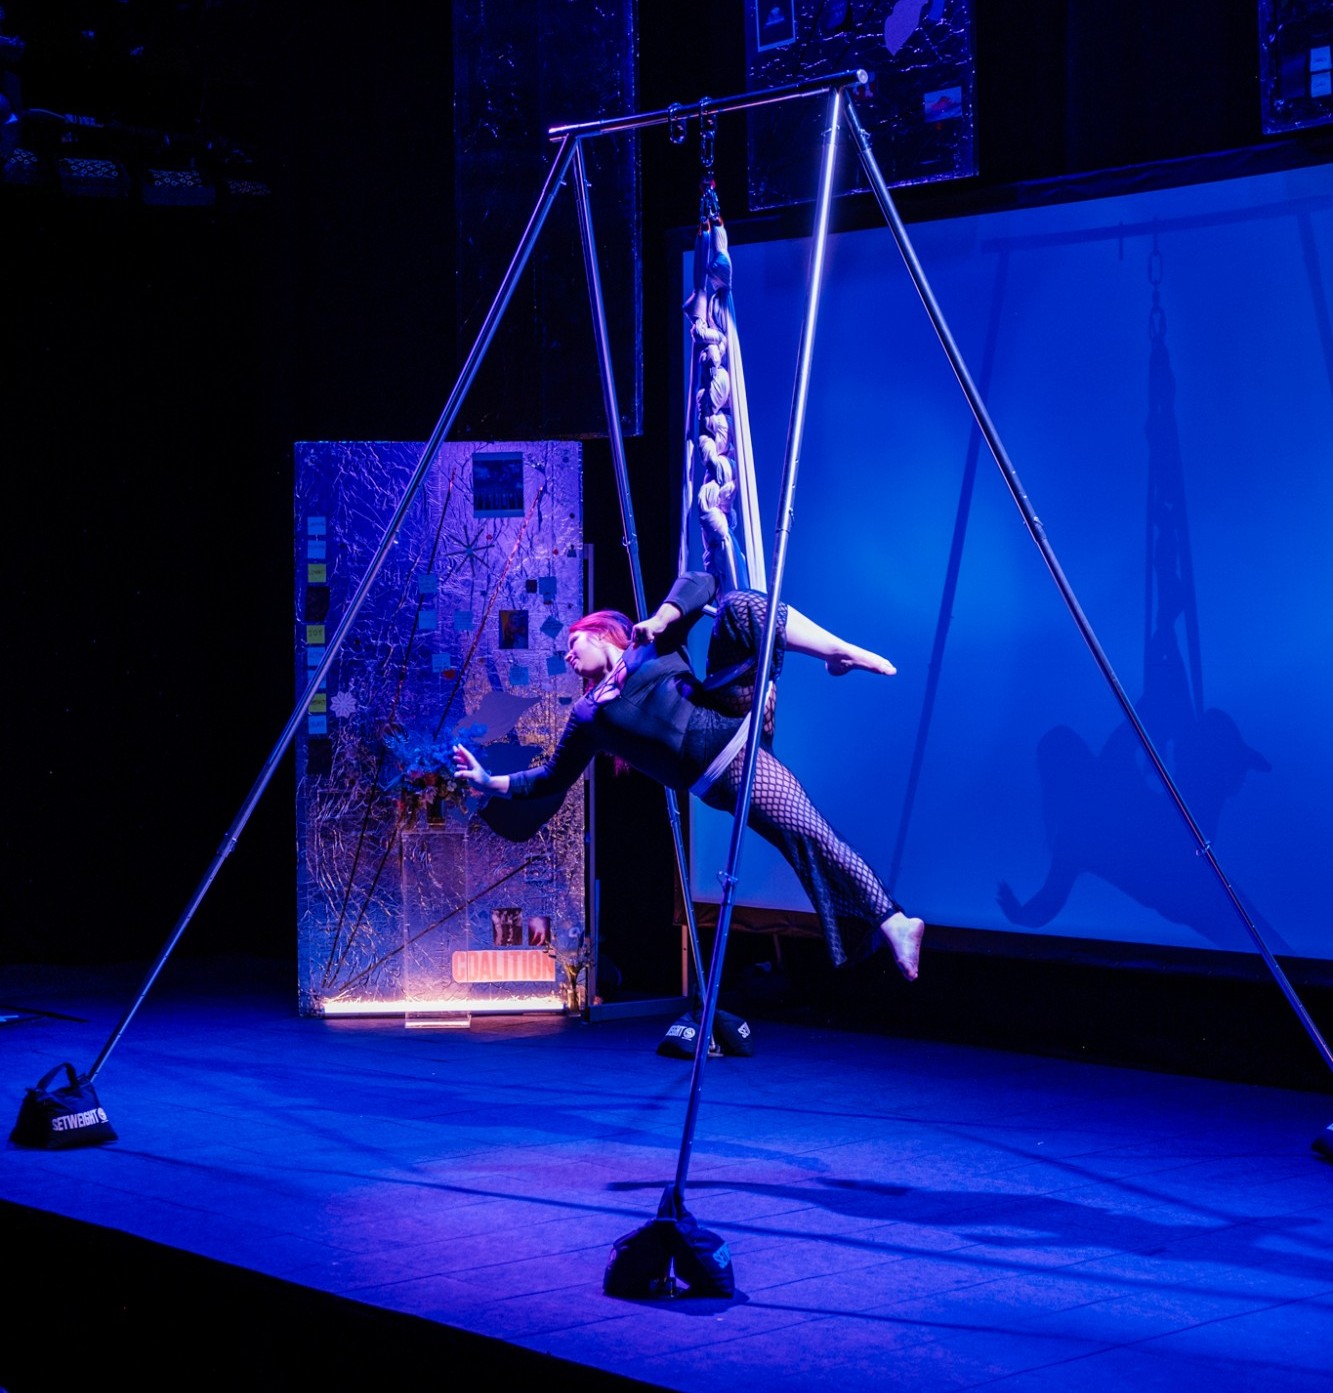 A woman on a stage in an aerial hammock